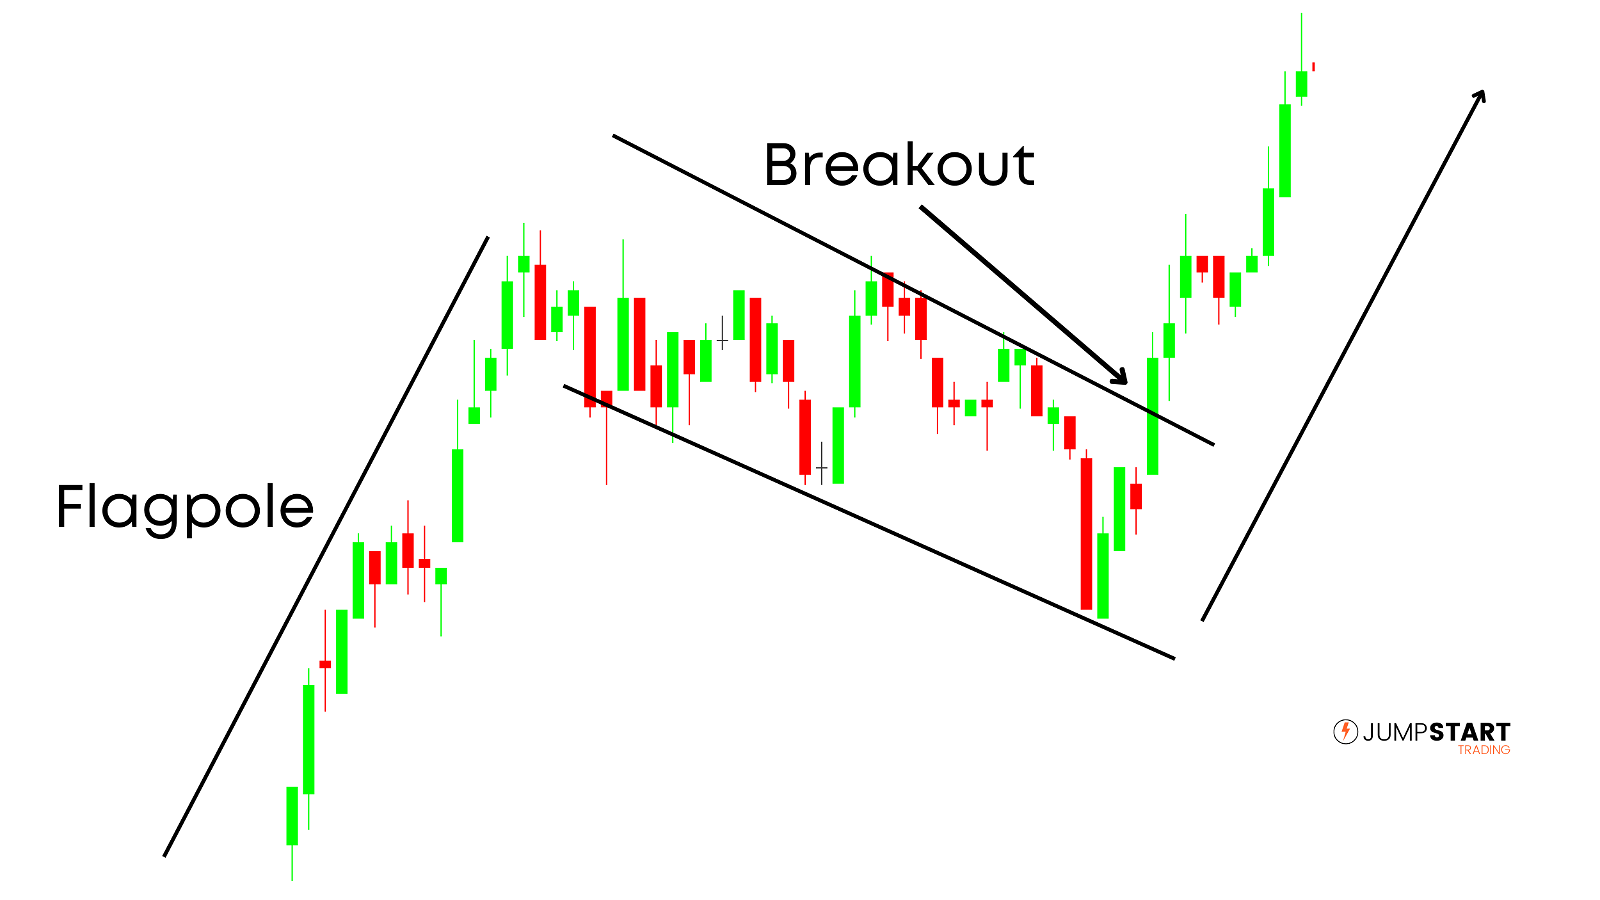 Price consolidating in uptrend forming a bullish flag pattern